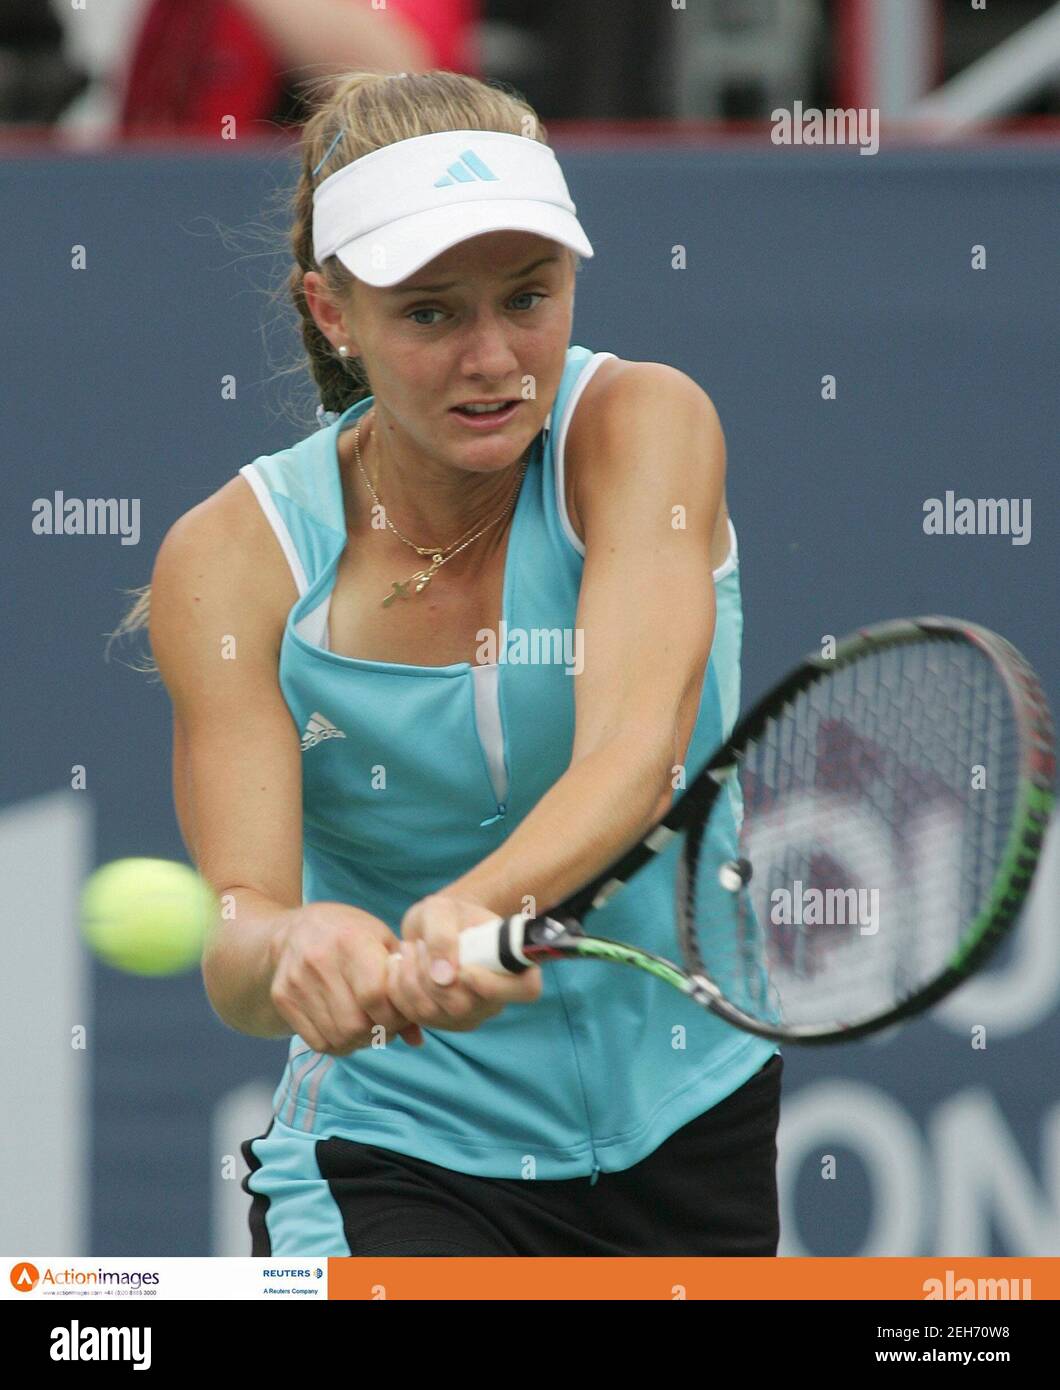 Tennis - Rogers Cup, Sony Ericsson WTA Tour - Montreal, Canada - 17/8/06  Anna Chakvetadze of Russia in action during the third round  Mandatory Credit: Action Images / Chris Wattie  Livepic Stock Photo